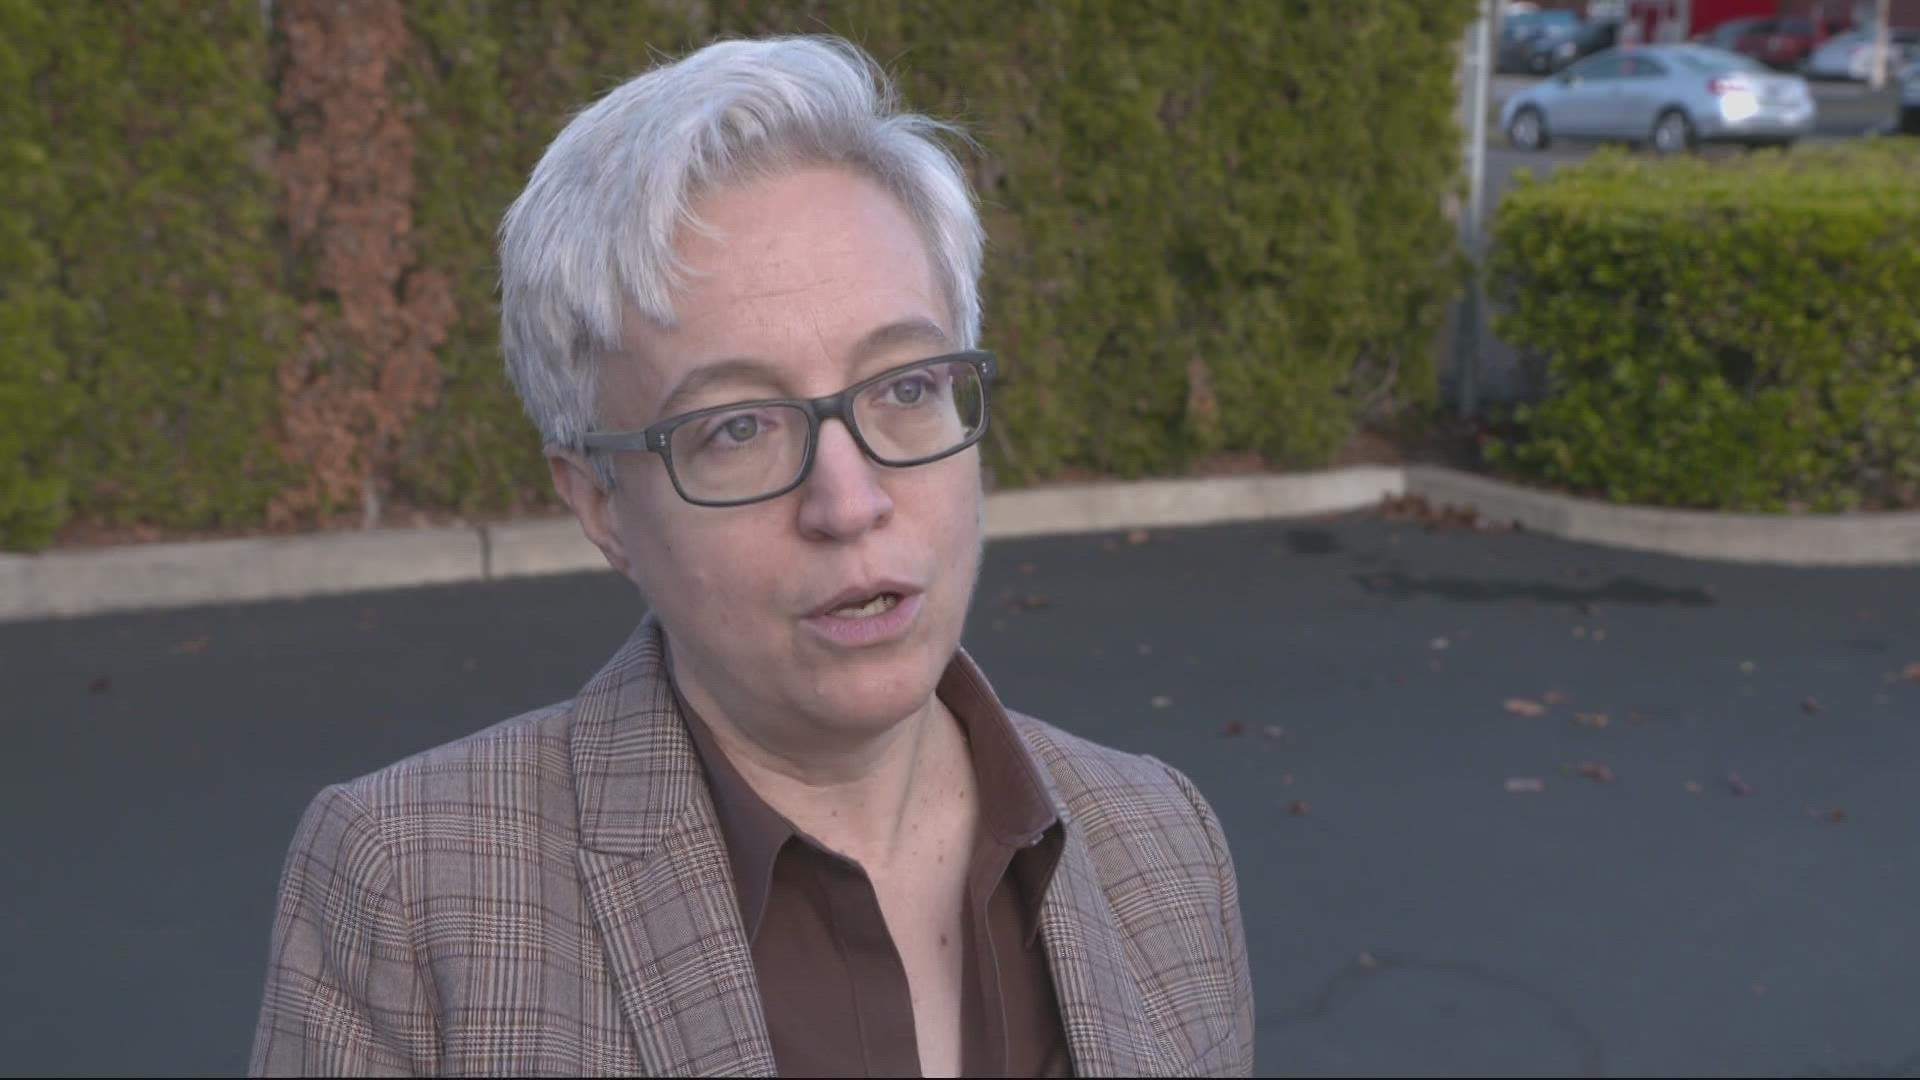 Oregon Governor-elect Tina Kotek started her Oregon listening tour by talking with healthcare workers, early childhood educators and city and housing experts